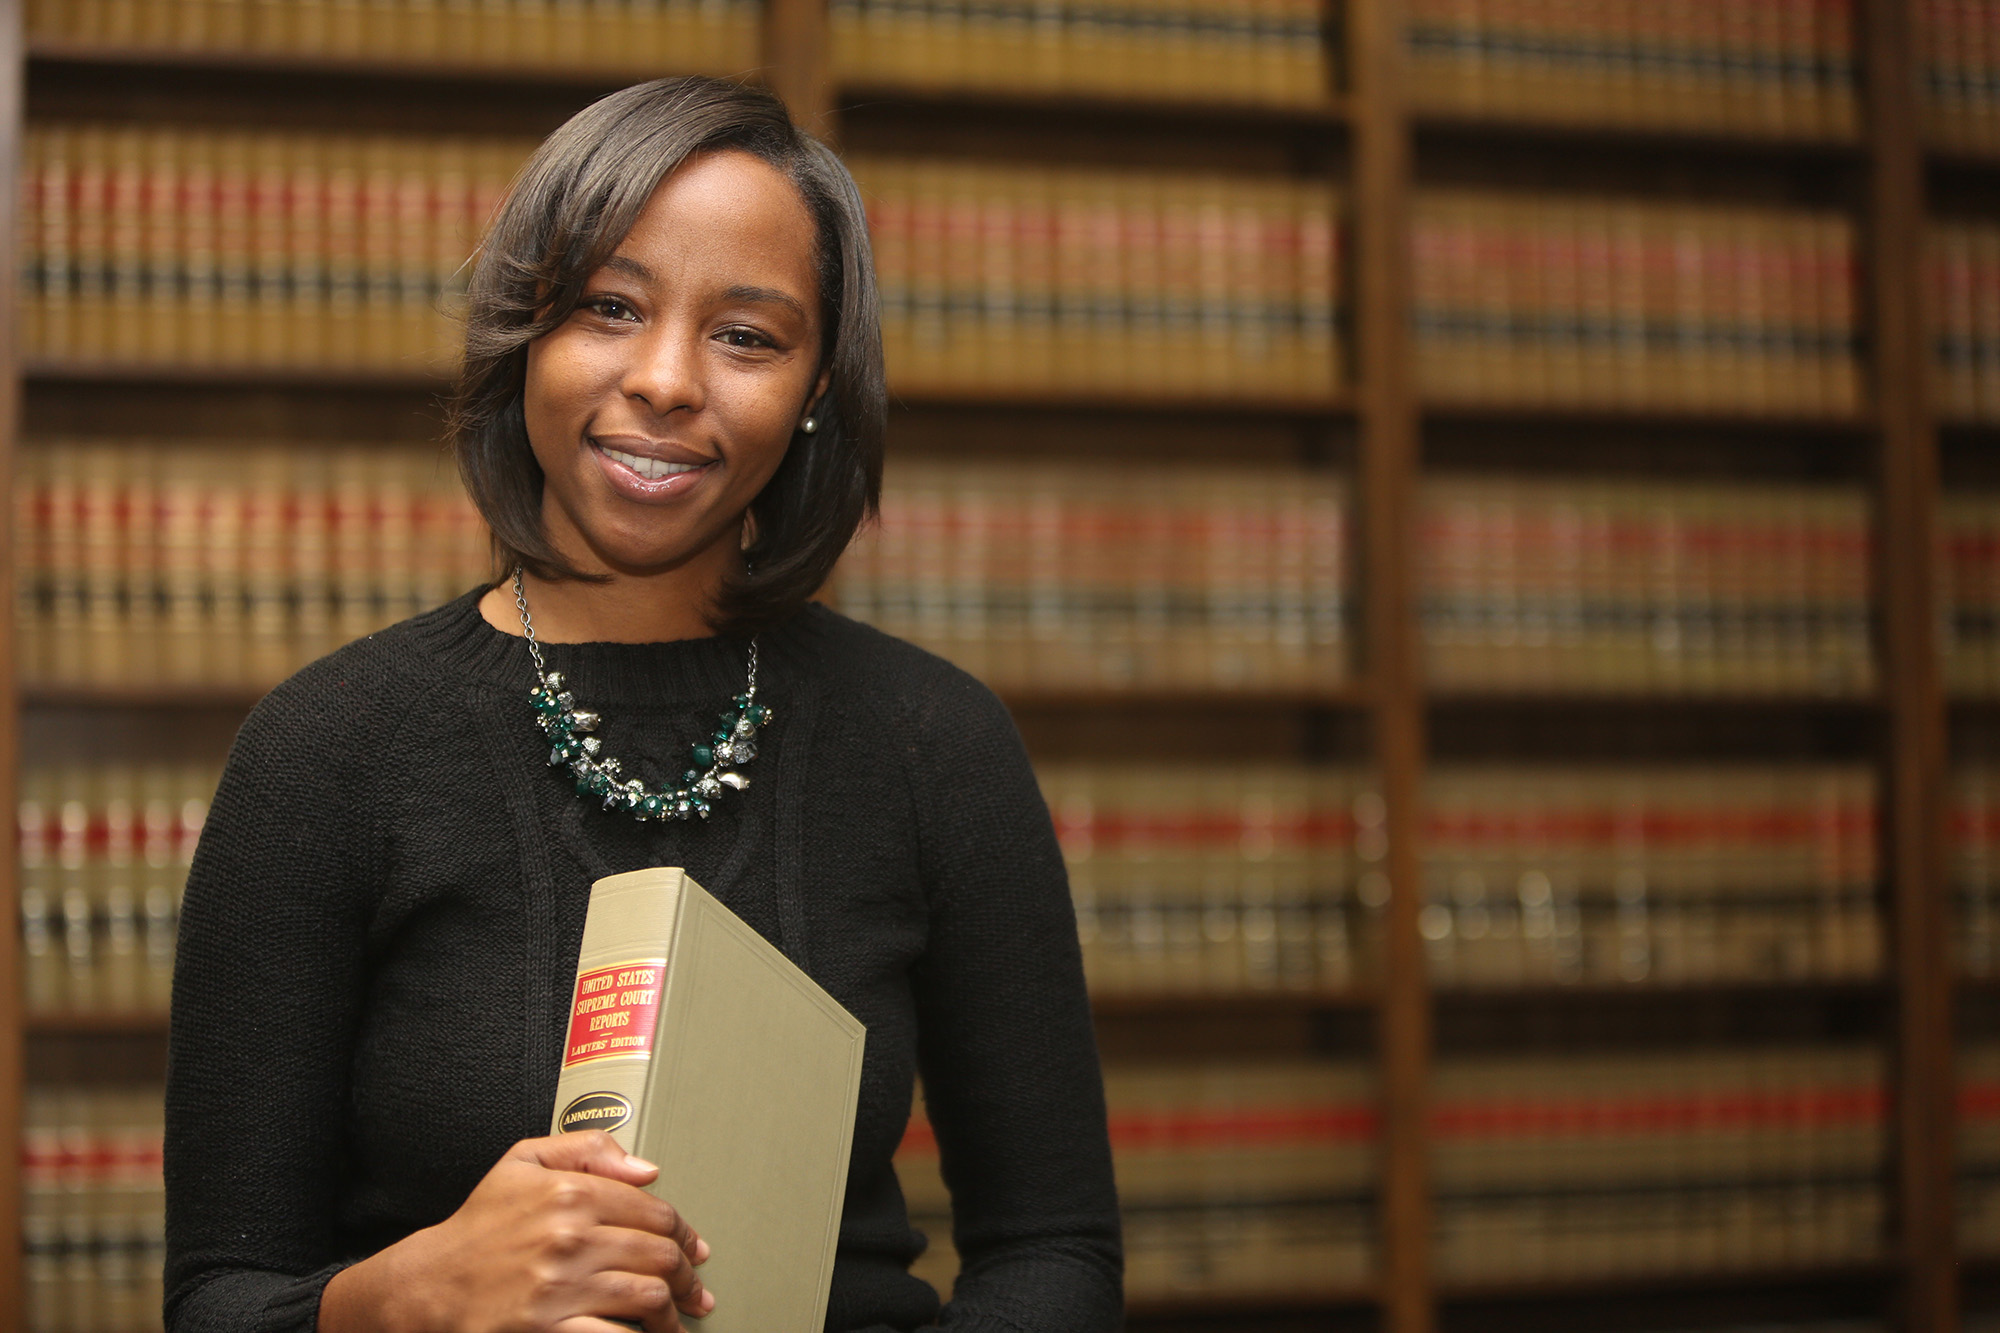 Woman holding law book city attorneys